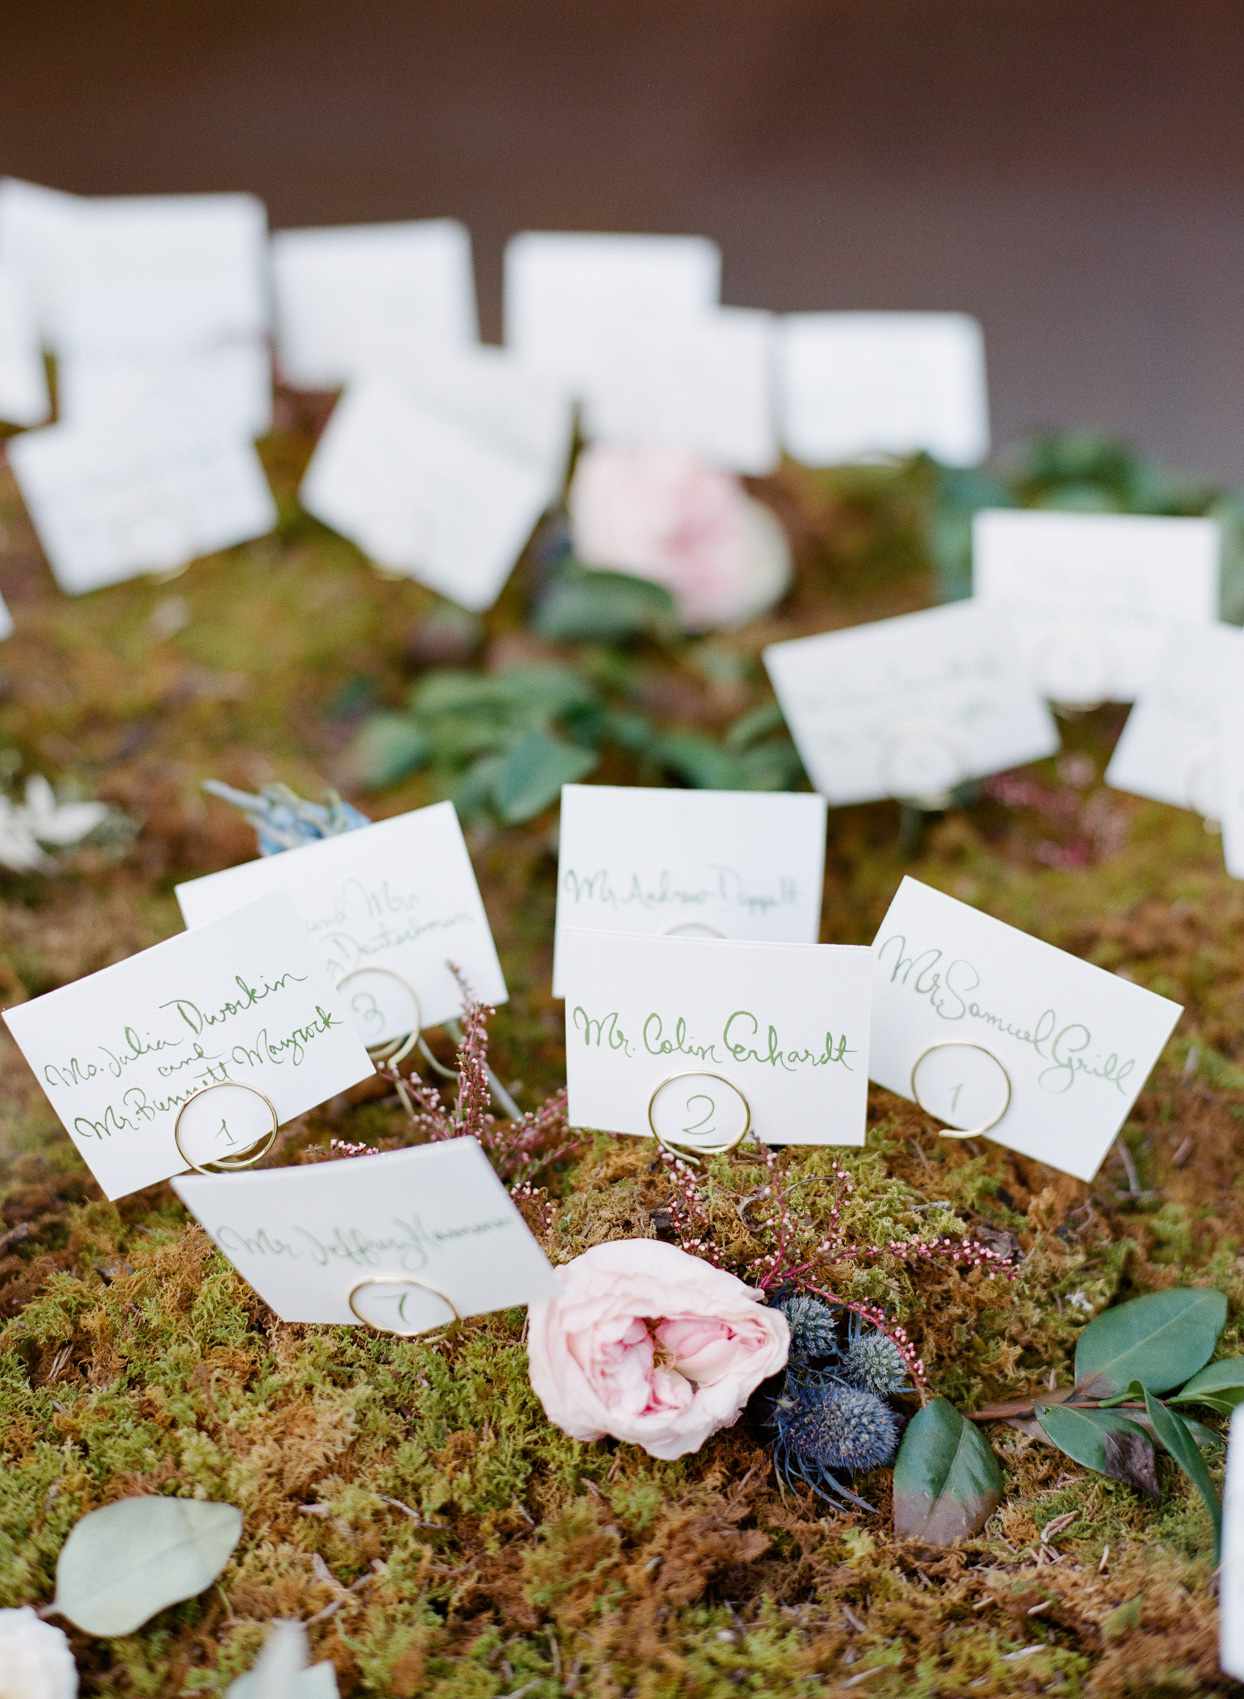 escort cards displayed on bed of moss with floral embellishments